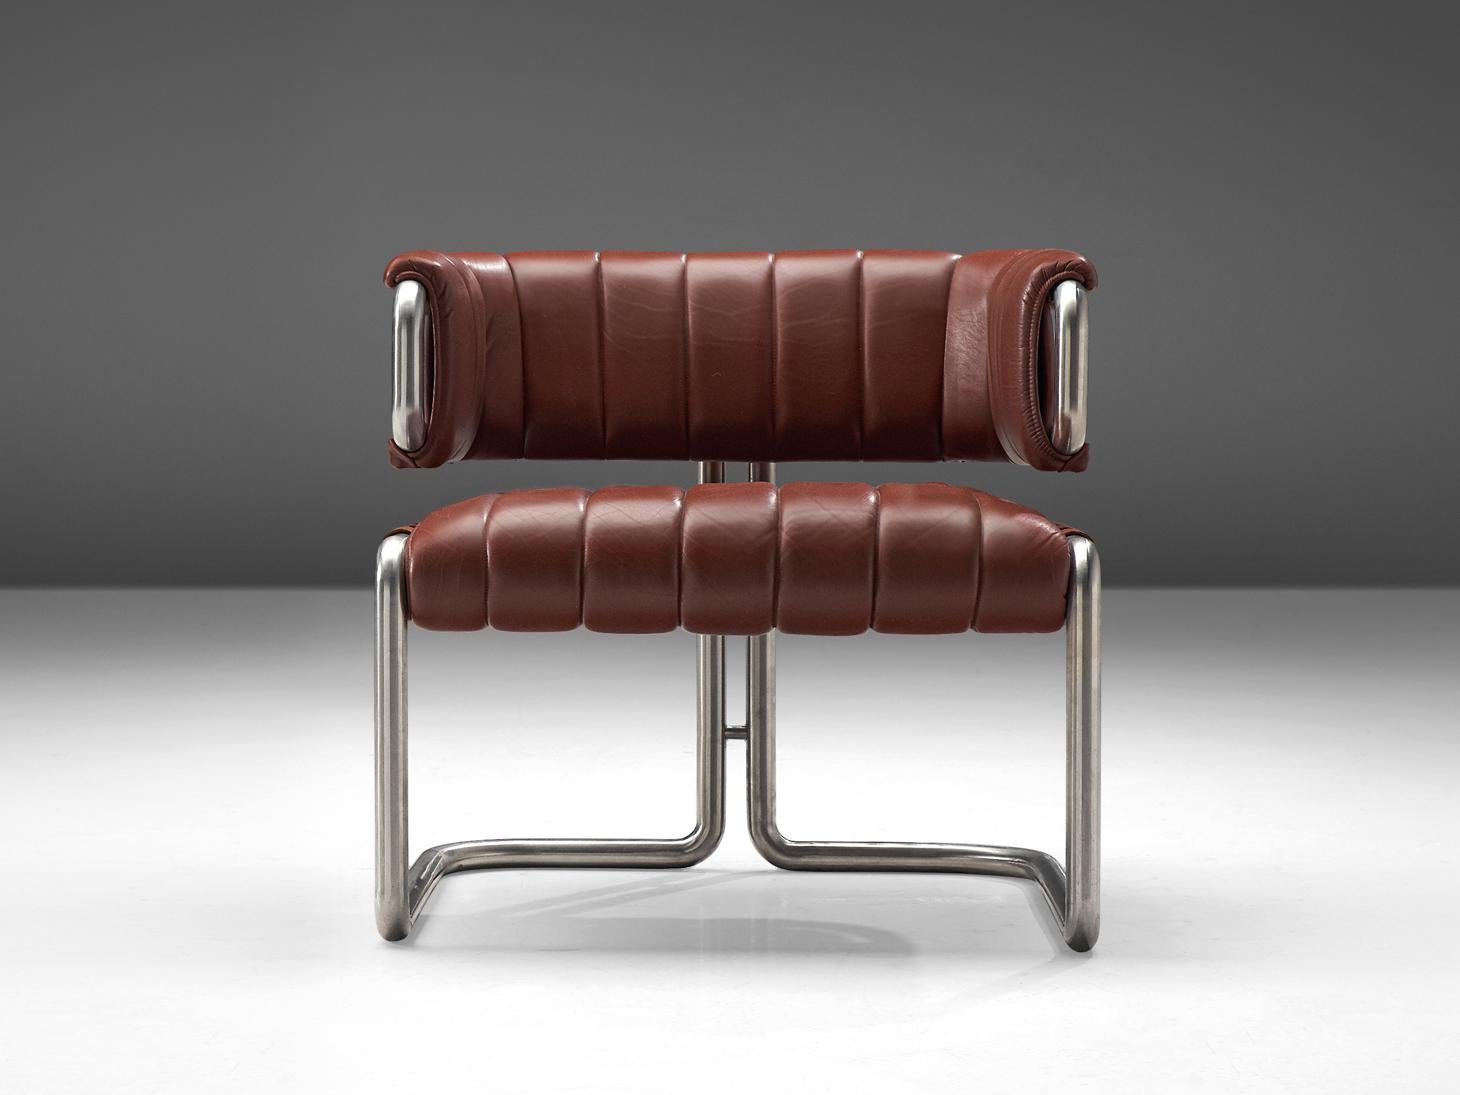 German Cubist Tubular Lounge Chair in Red Leather